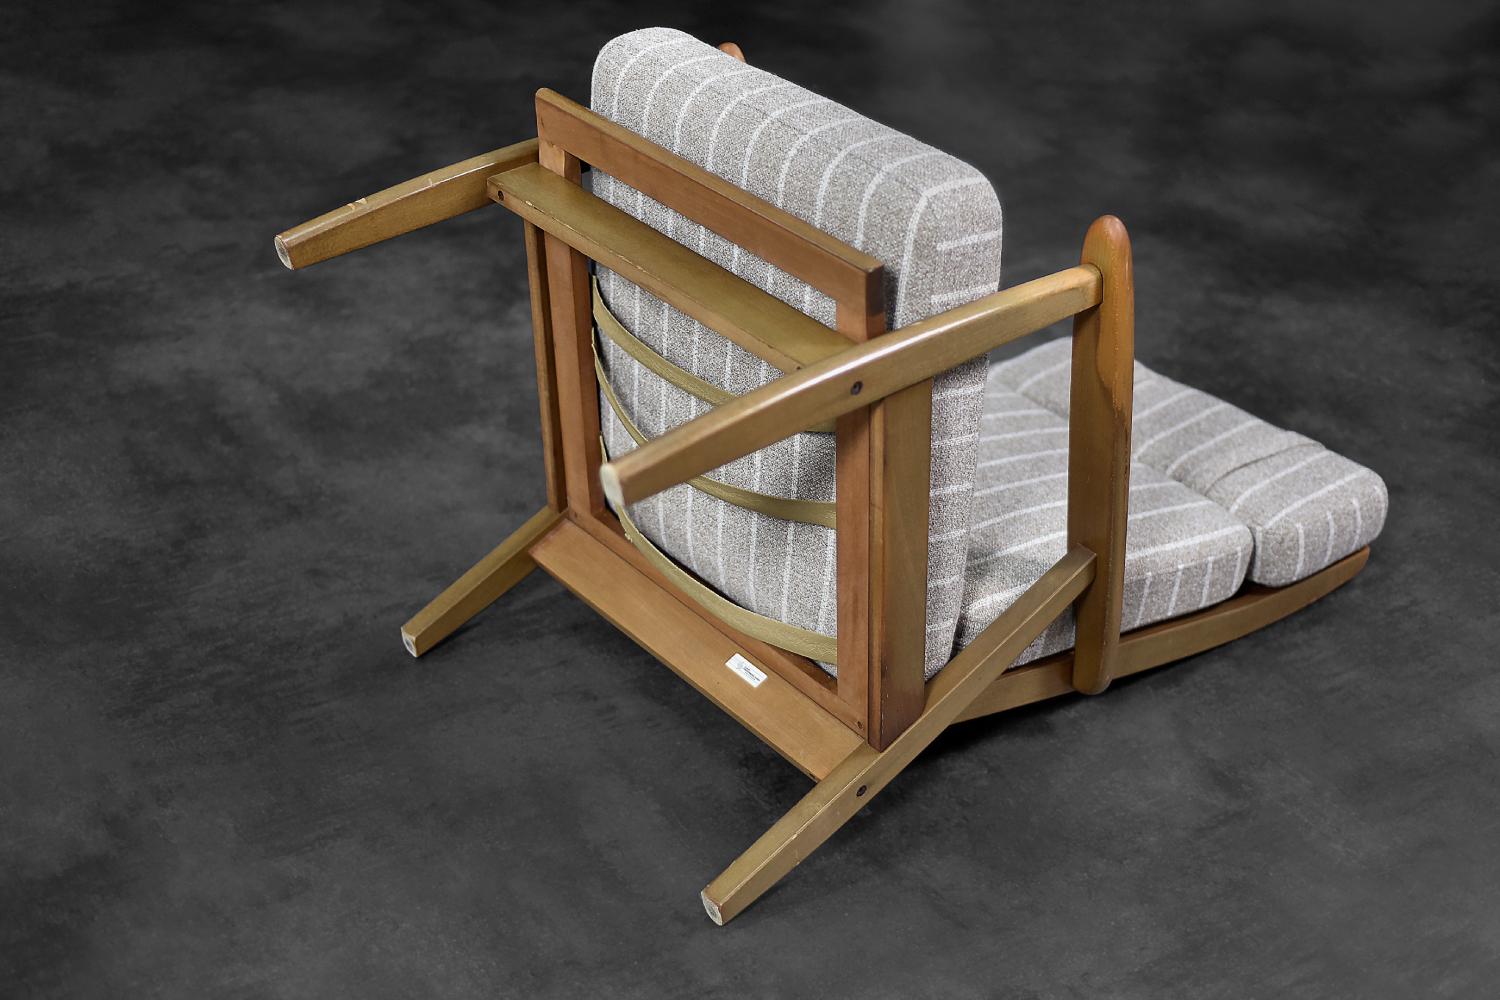 Vintage Midcentury Danish Modern Wood & Beige Fabric Lounge Chair from Durup For Sale 4